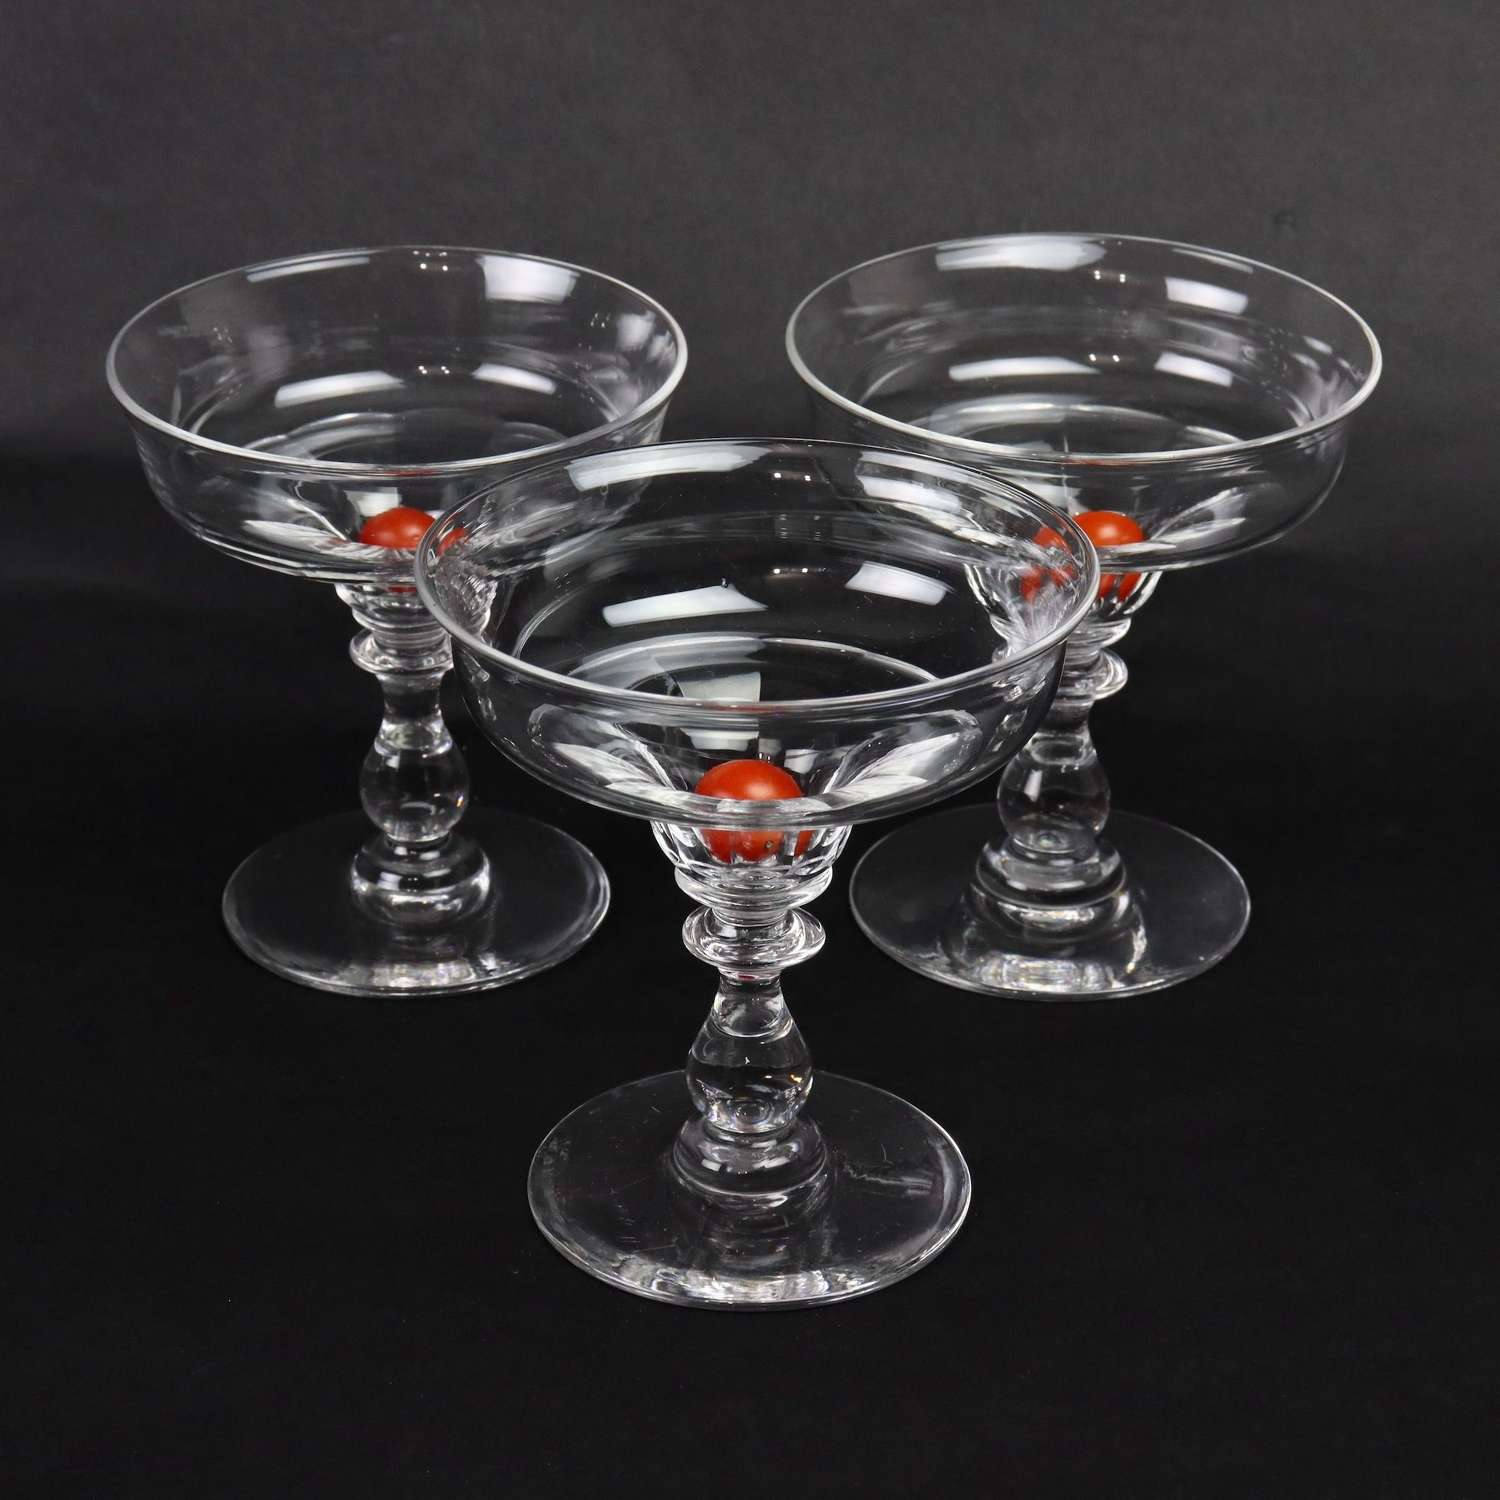 3 fine quality, crystal coupes